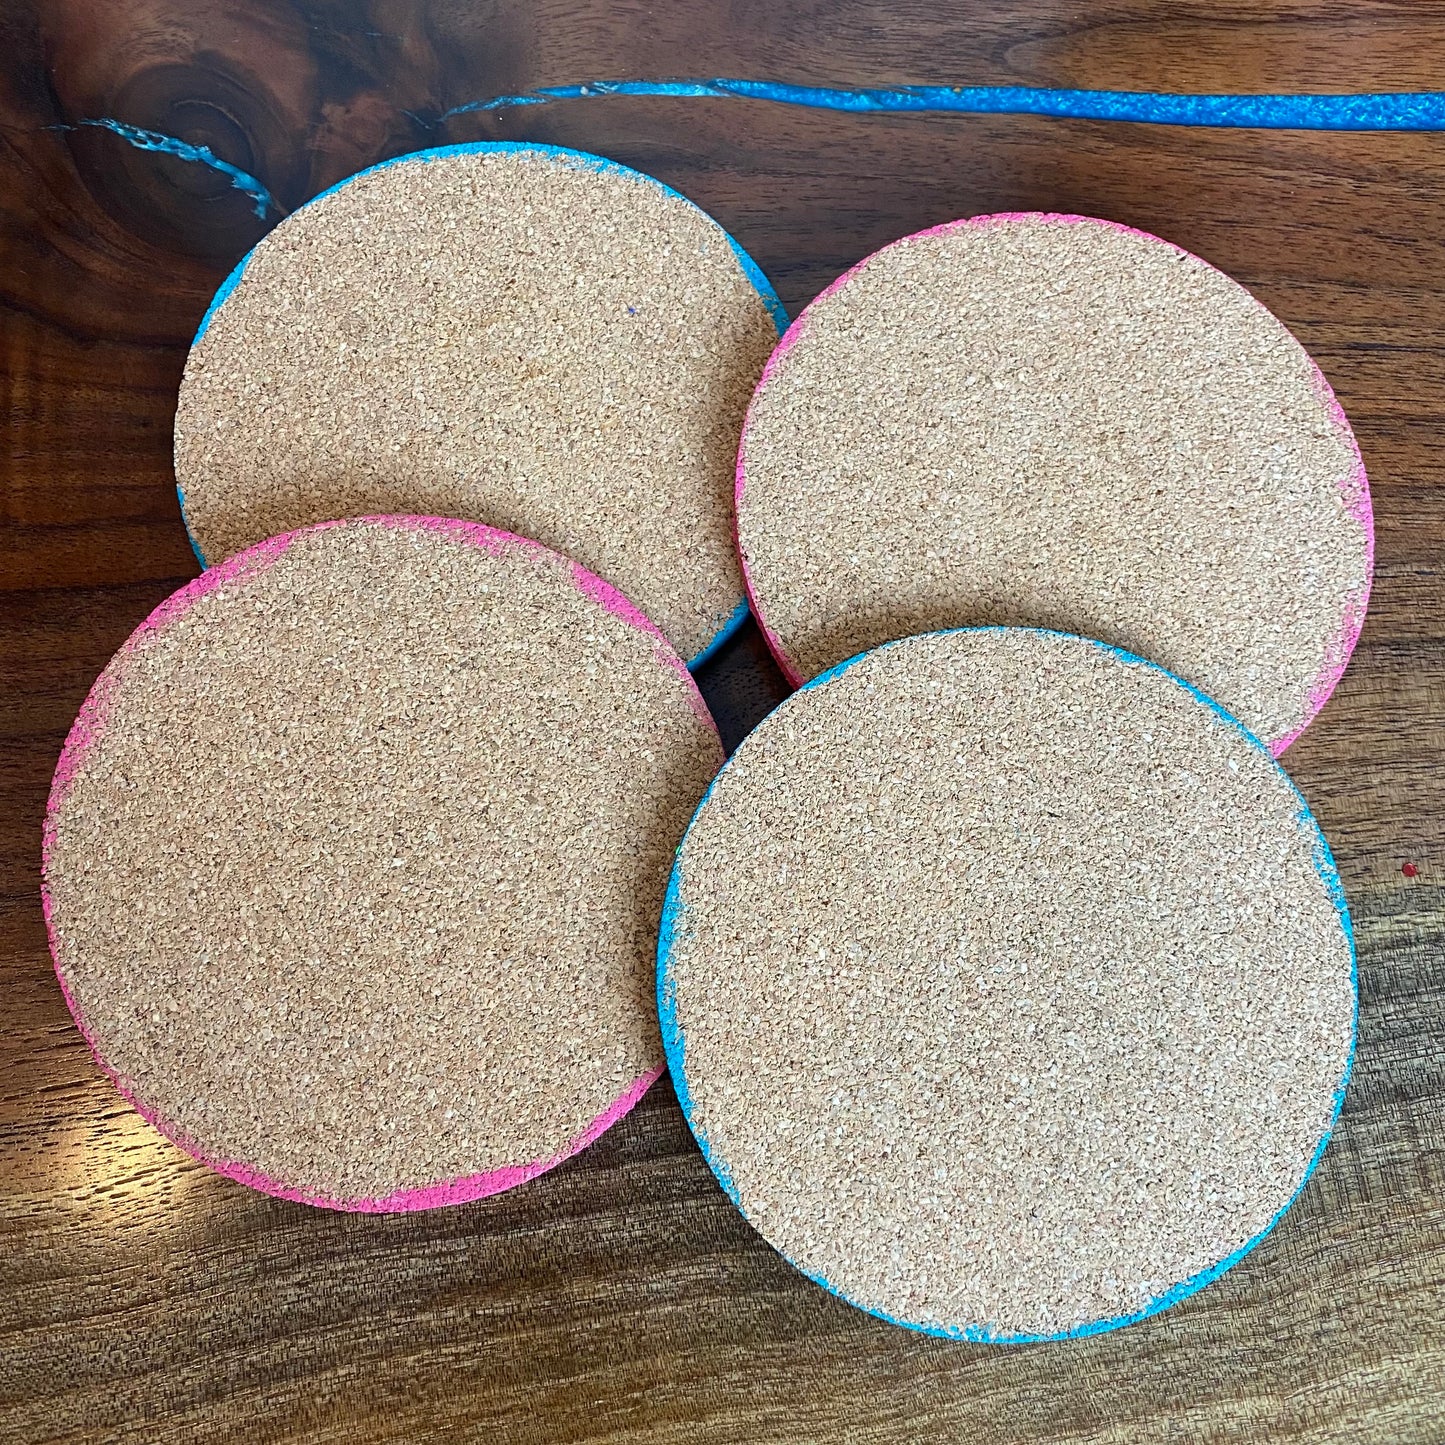 Hand Made Mexican Theme Cork Coasters